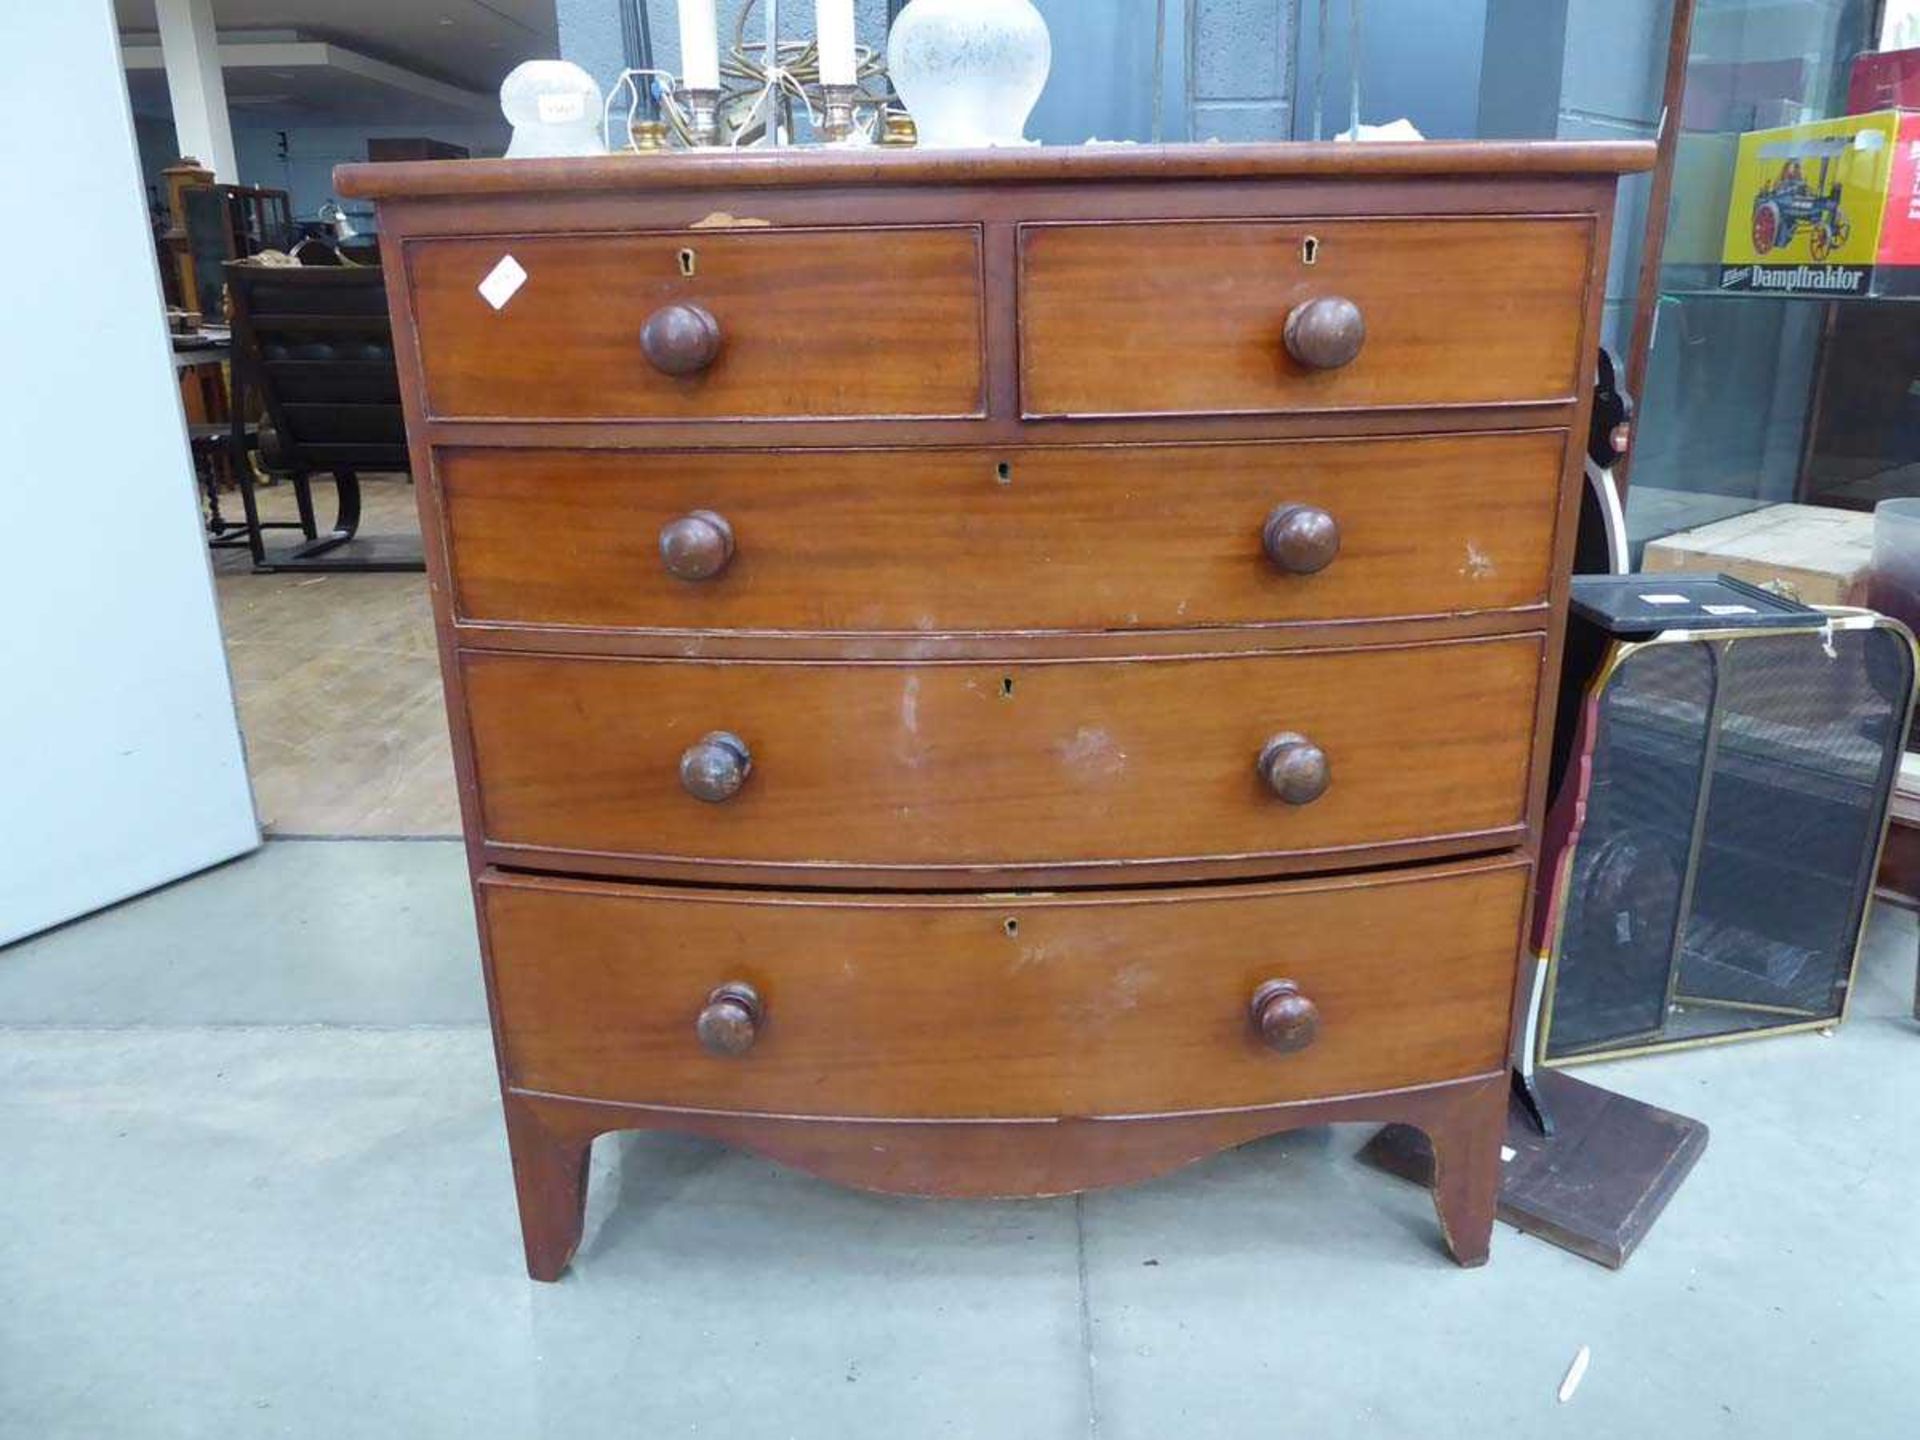 Mahogany Bow fronted chest of 2 over 3 drawers